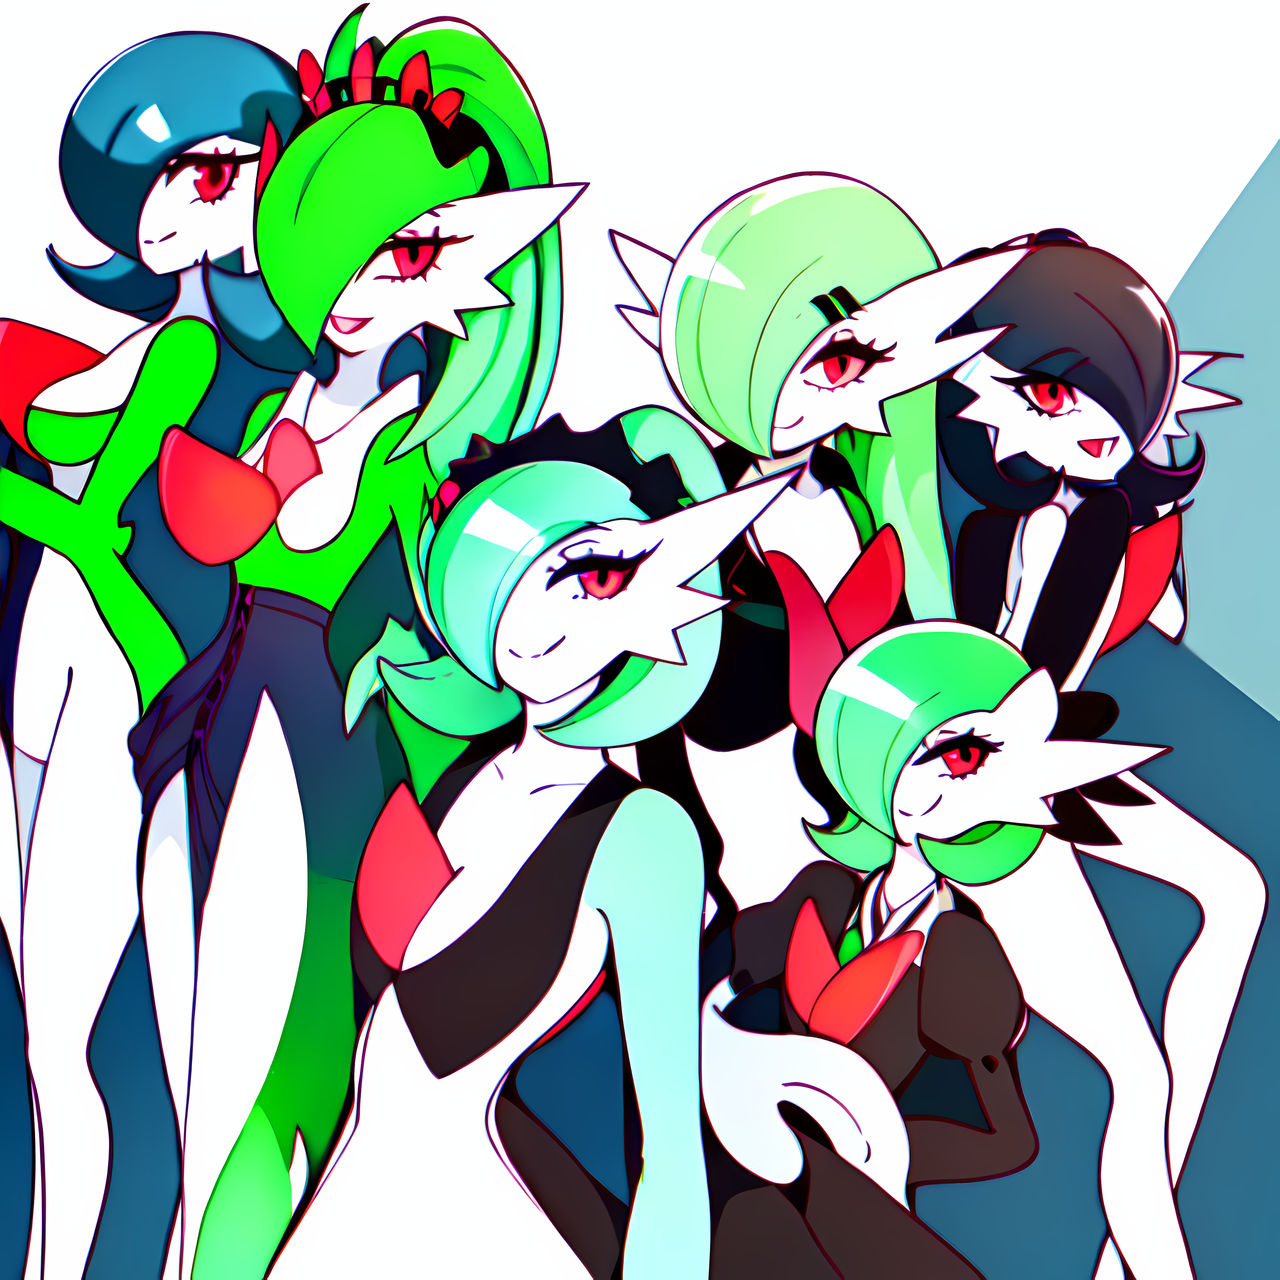 Gardevoir full party by OmegaLights on DeviantArt